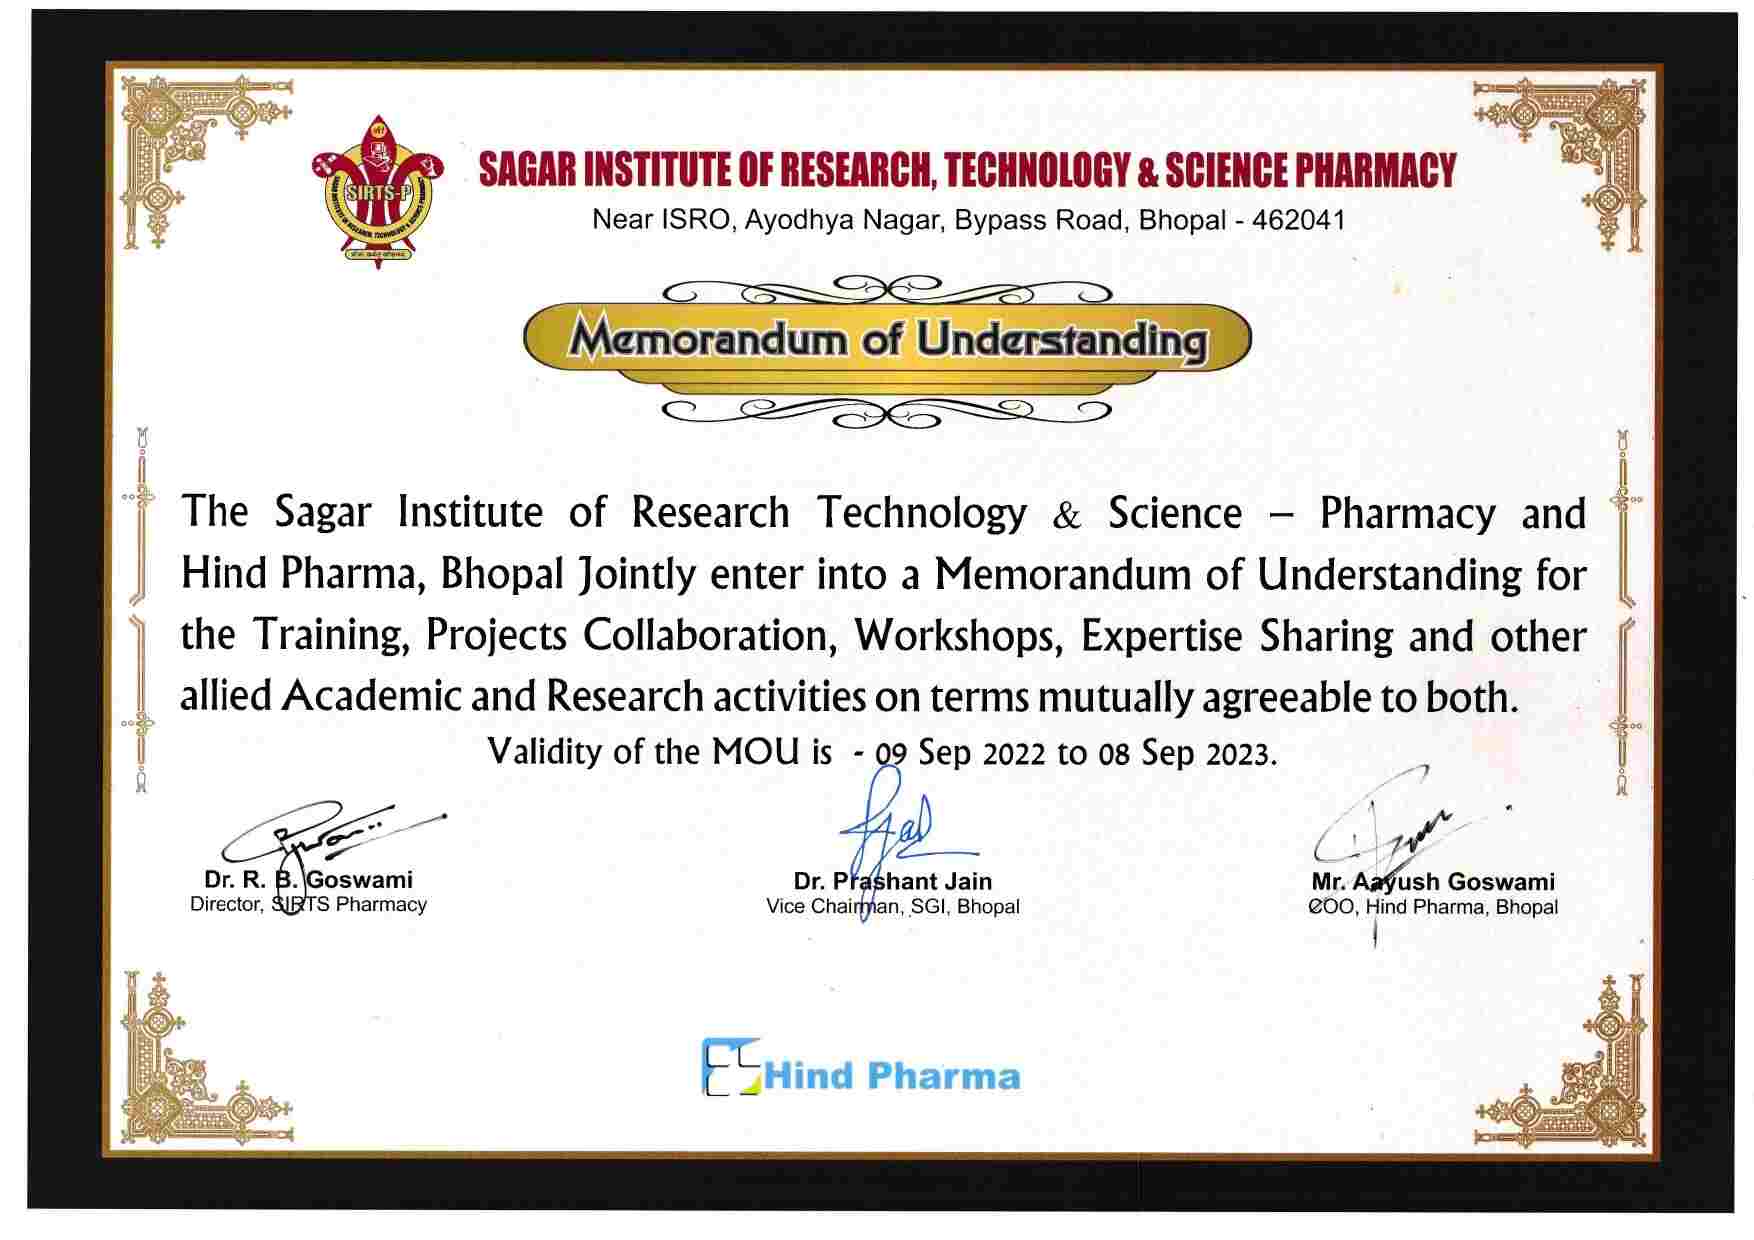 Glimpses of Signing (MoU) between SIRTP and hind pharma